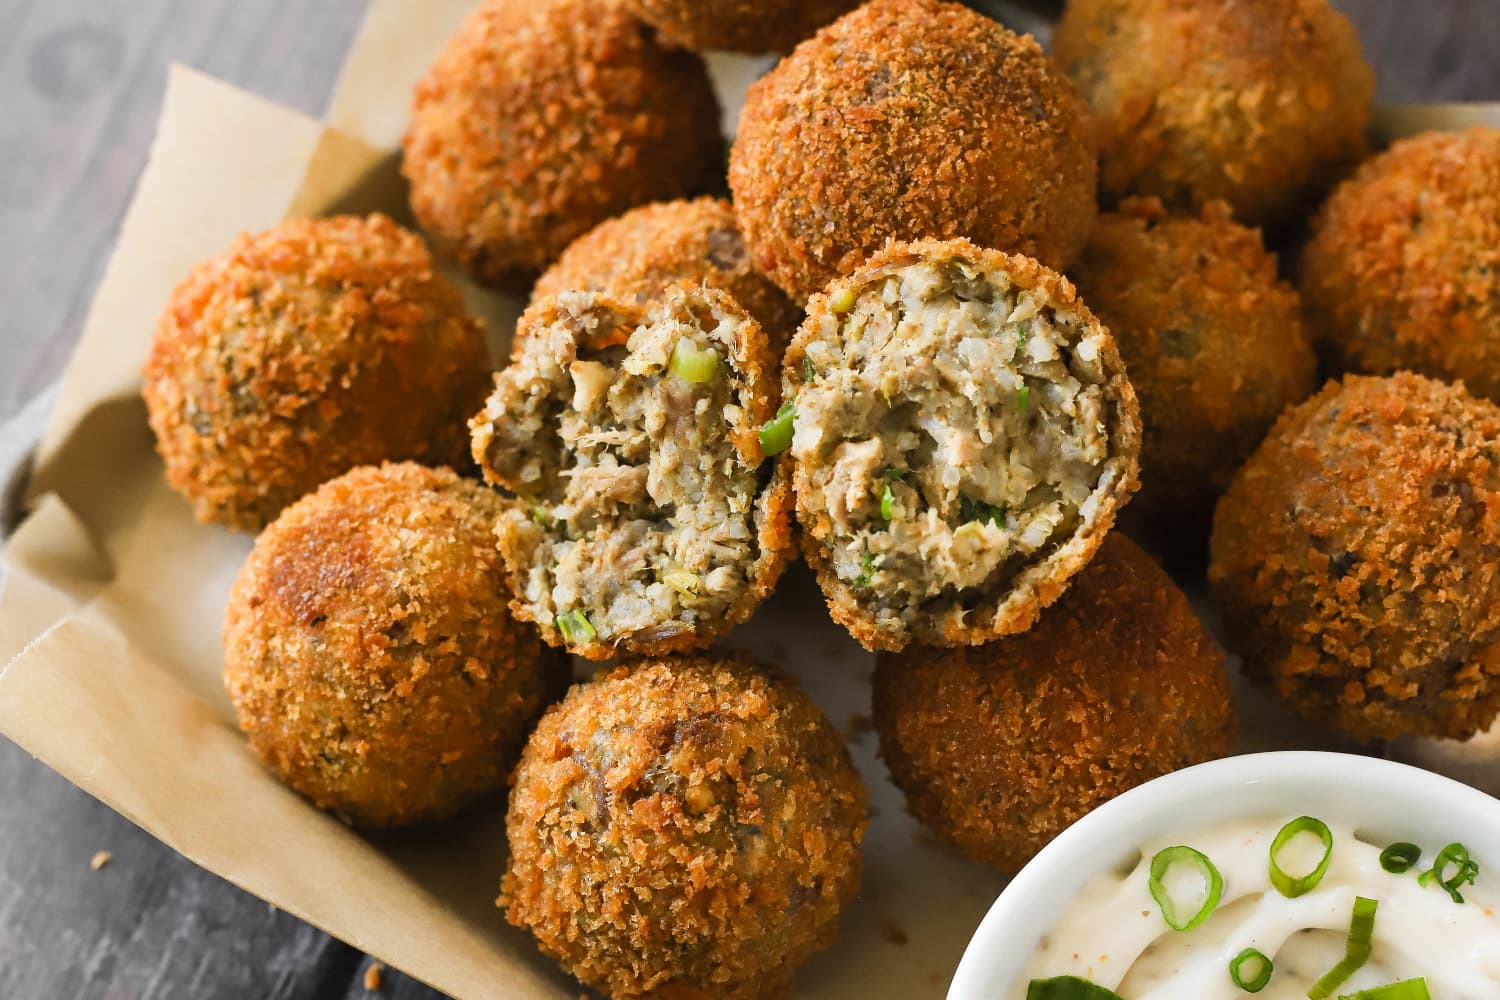 Boudin Balls Recipe (Fried, Cajun-Style, with Remoulade Sauce) | The Kitchn